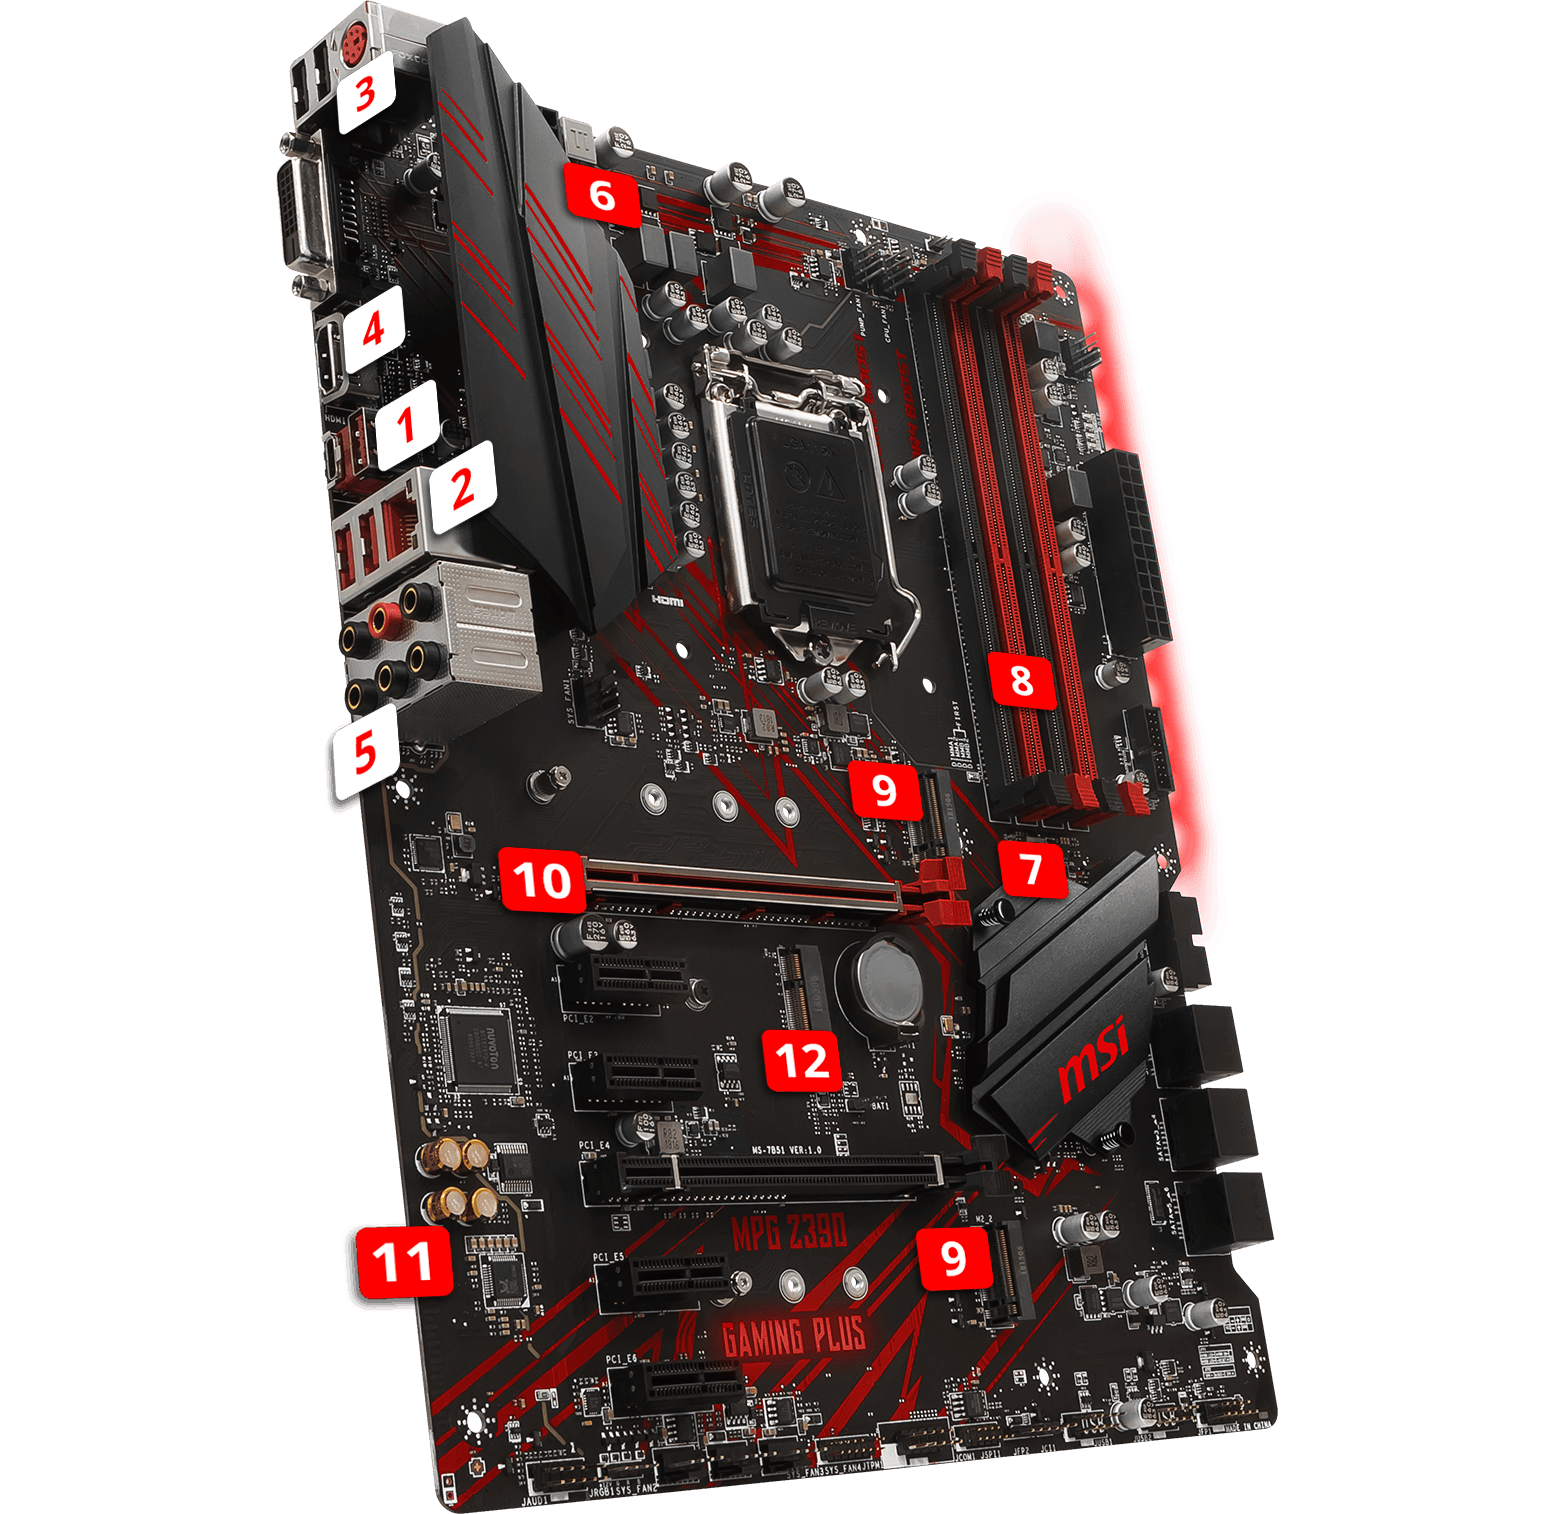 Z390 Gaming Plus features